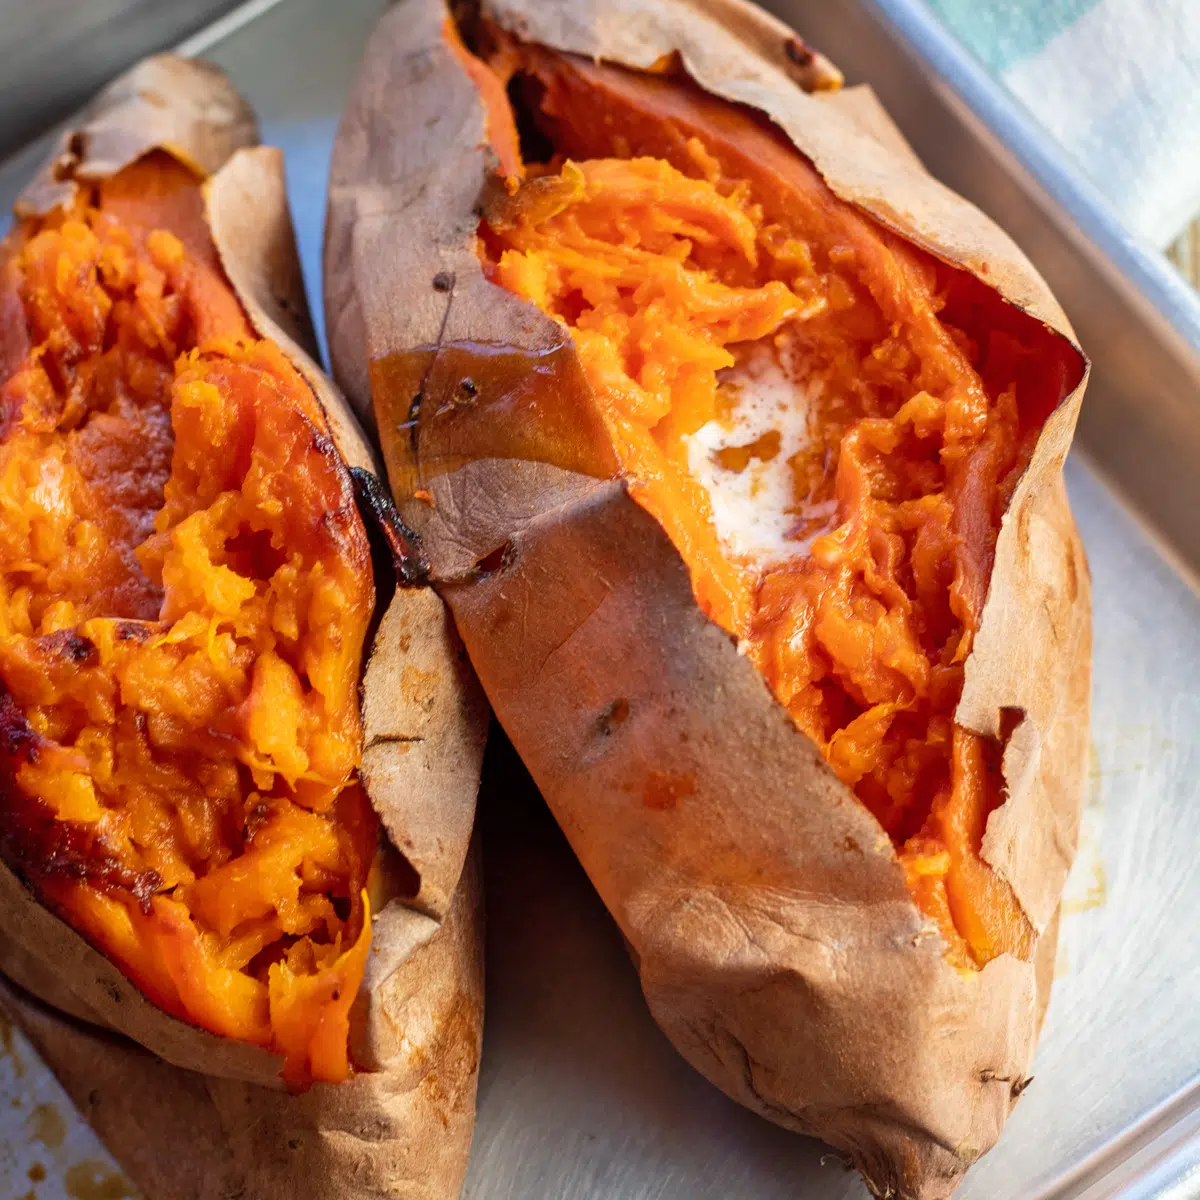 Baked sweet potatoes on a metal tray opened with a pat of butter inside.